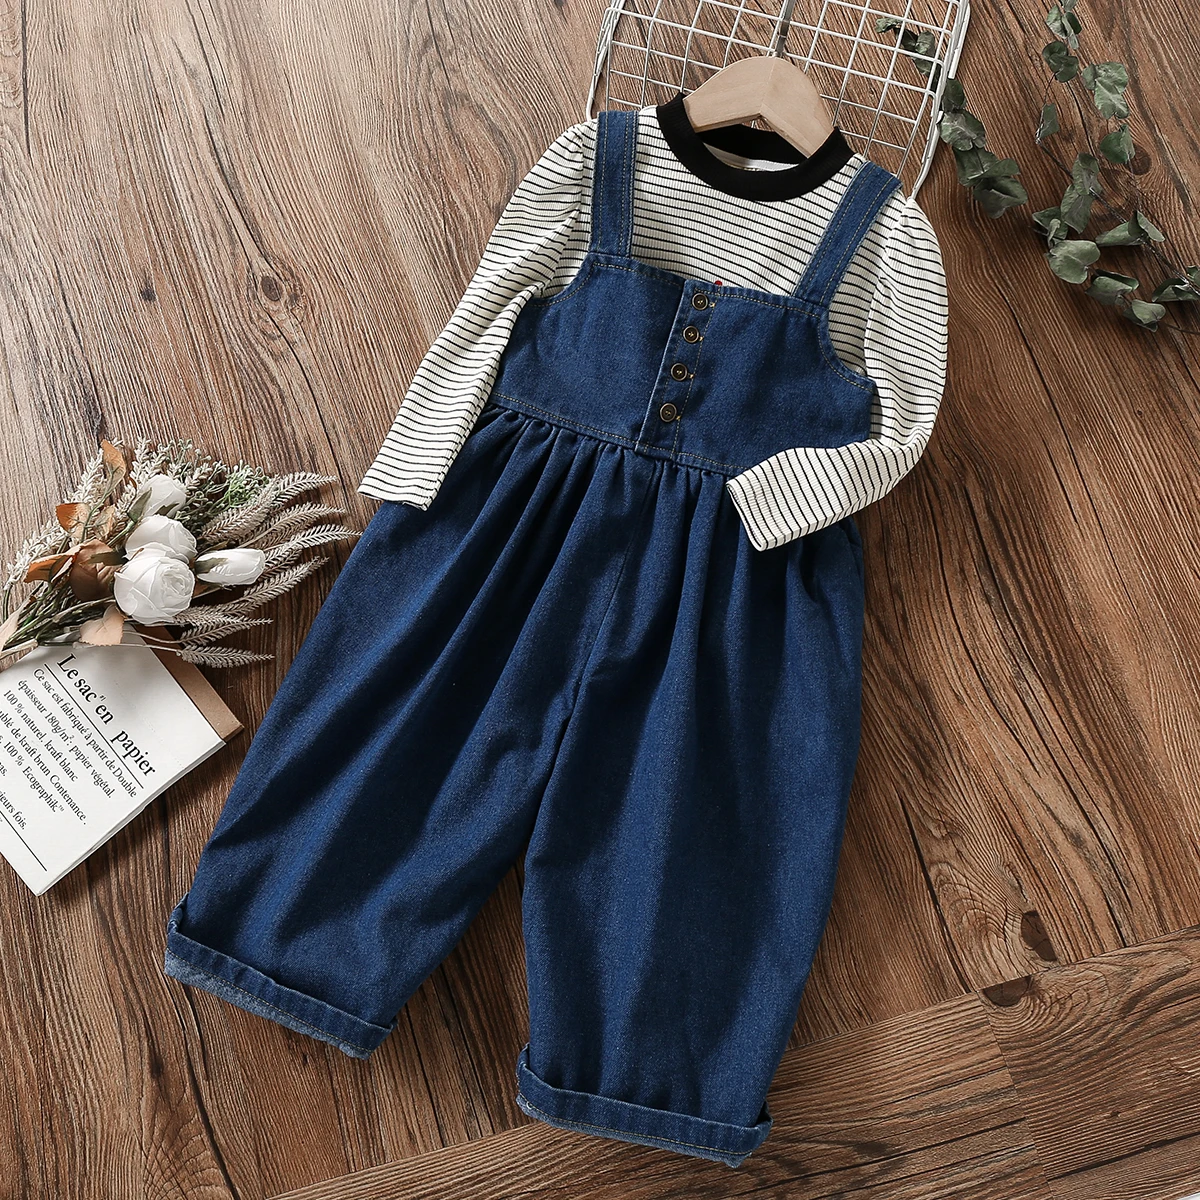 

Baby Girls Clothing Sets Stripe Shirts & Overalls 2pcs Outfits Kids Jeans Suits Autumn Toddles Children Costumes 2 4 6 8 Years